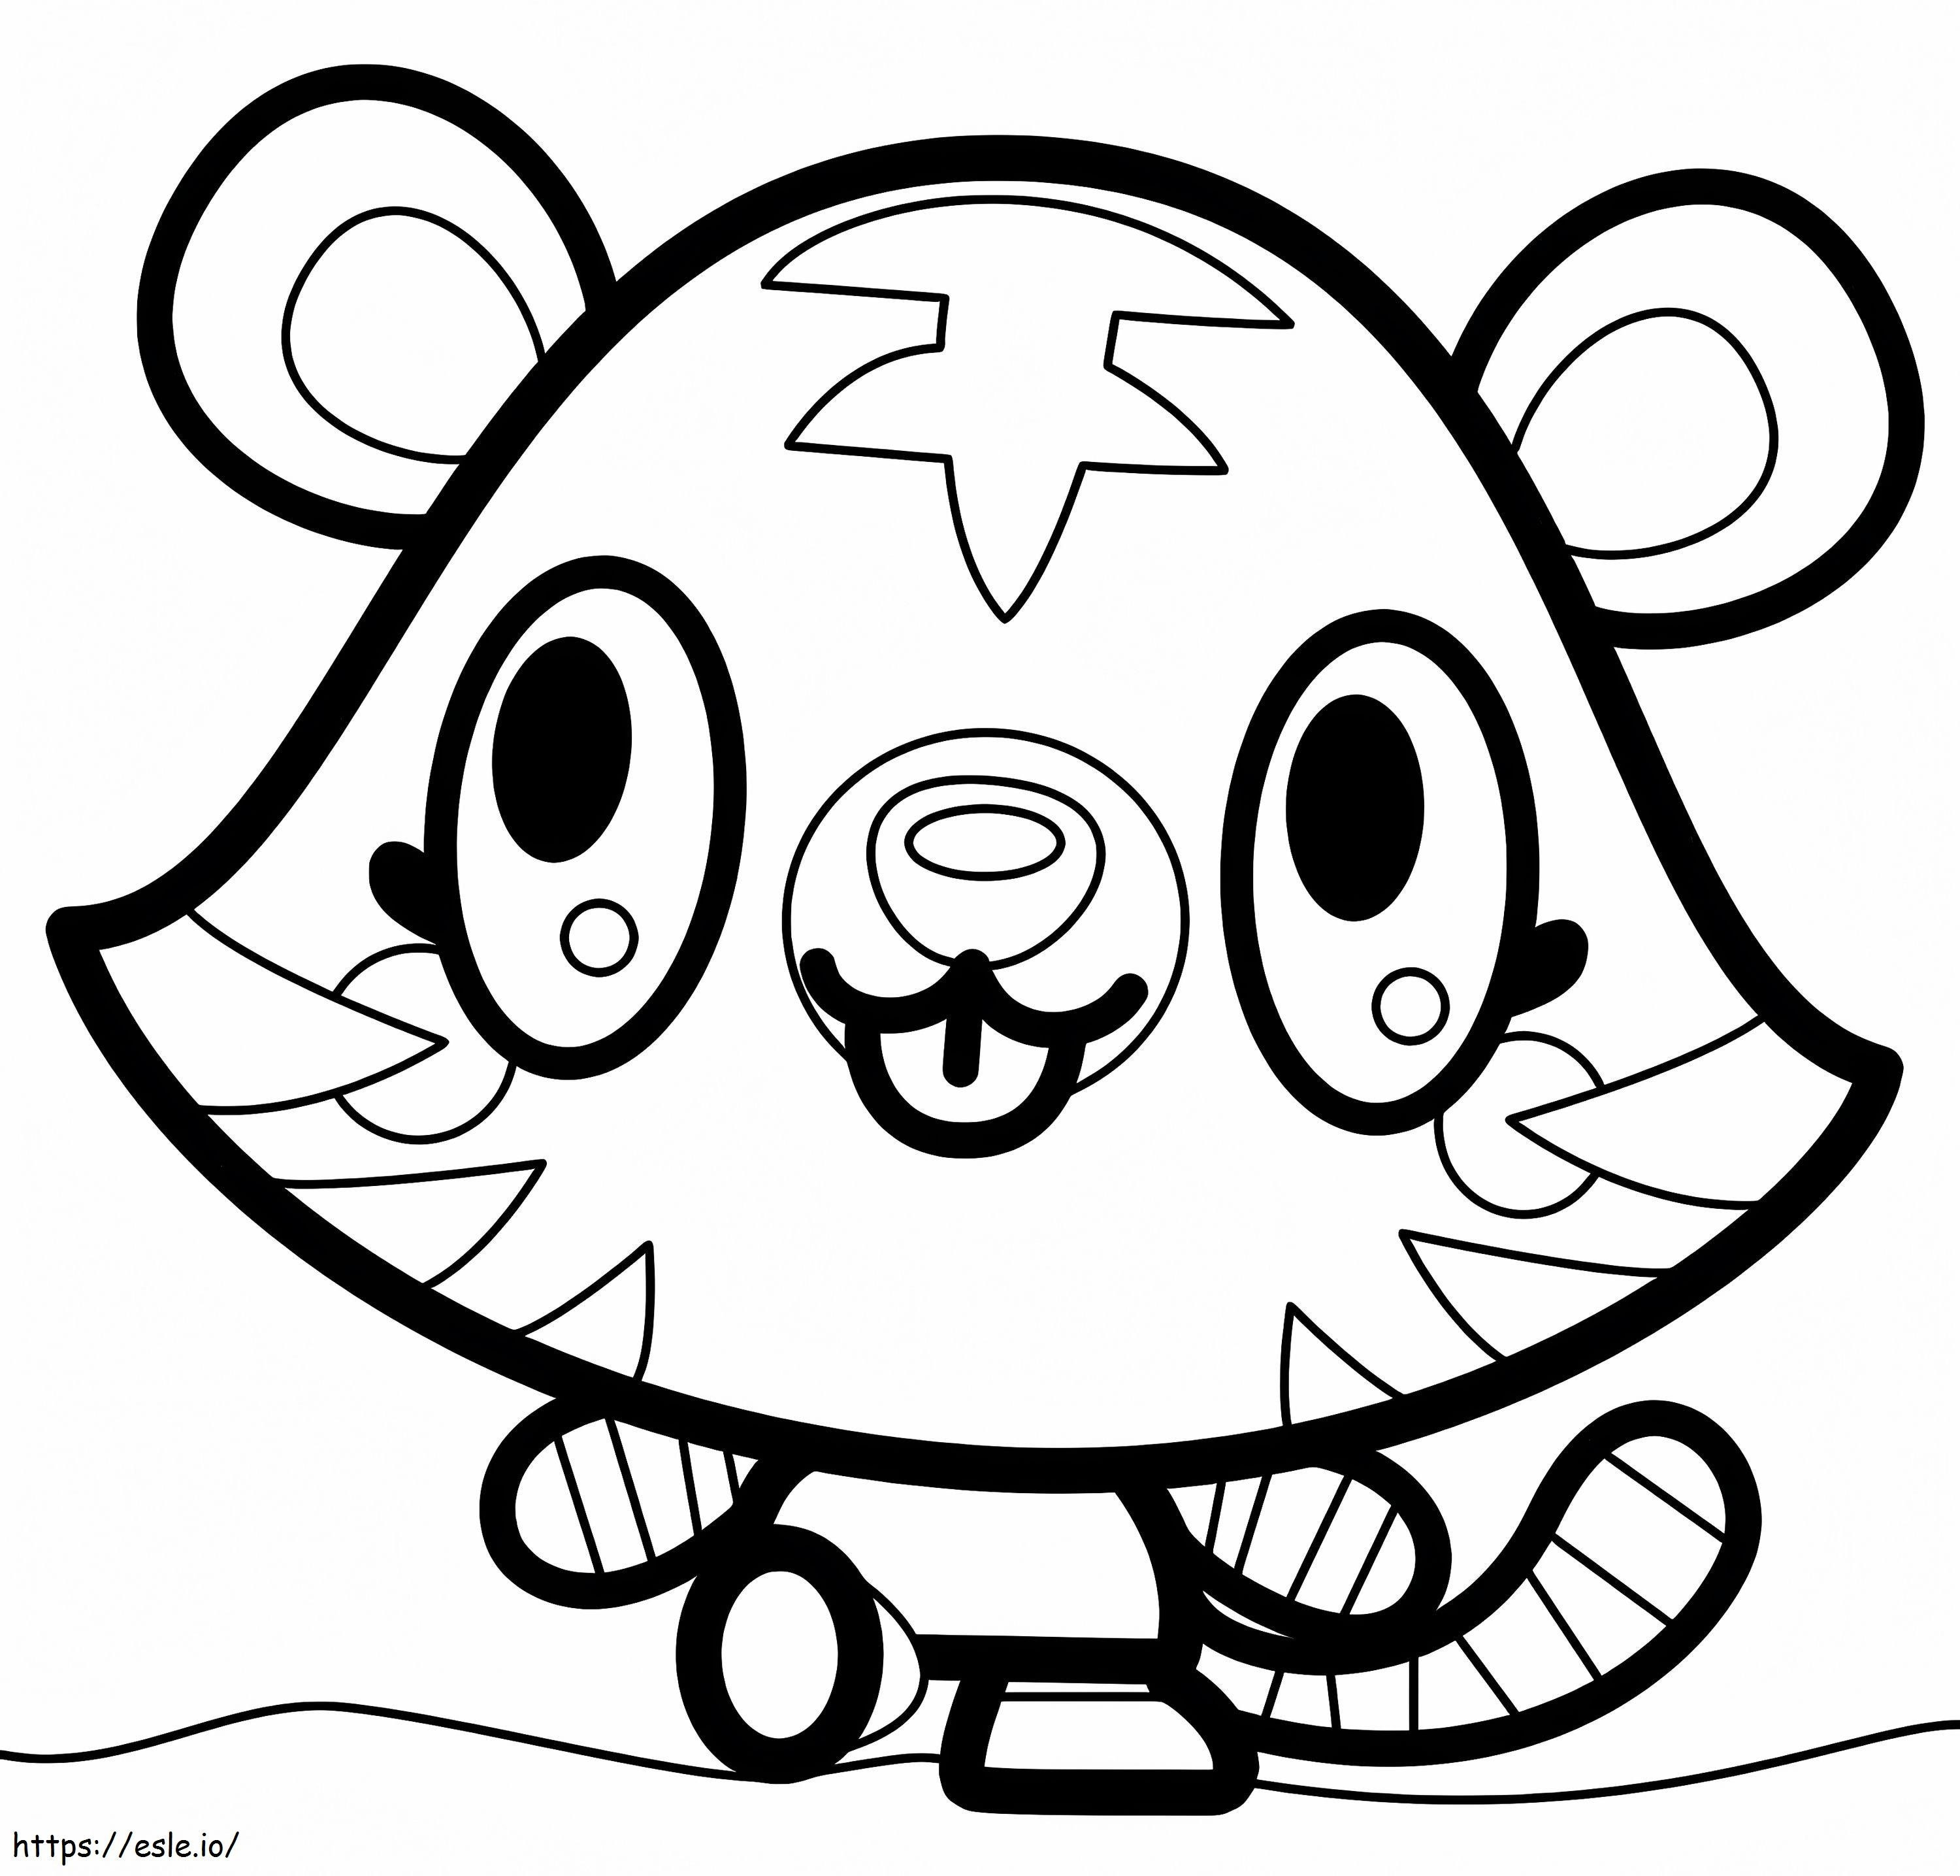 Moshi Monsters Jeepers coloring page